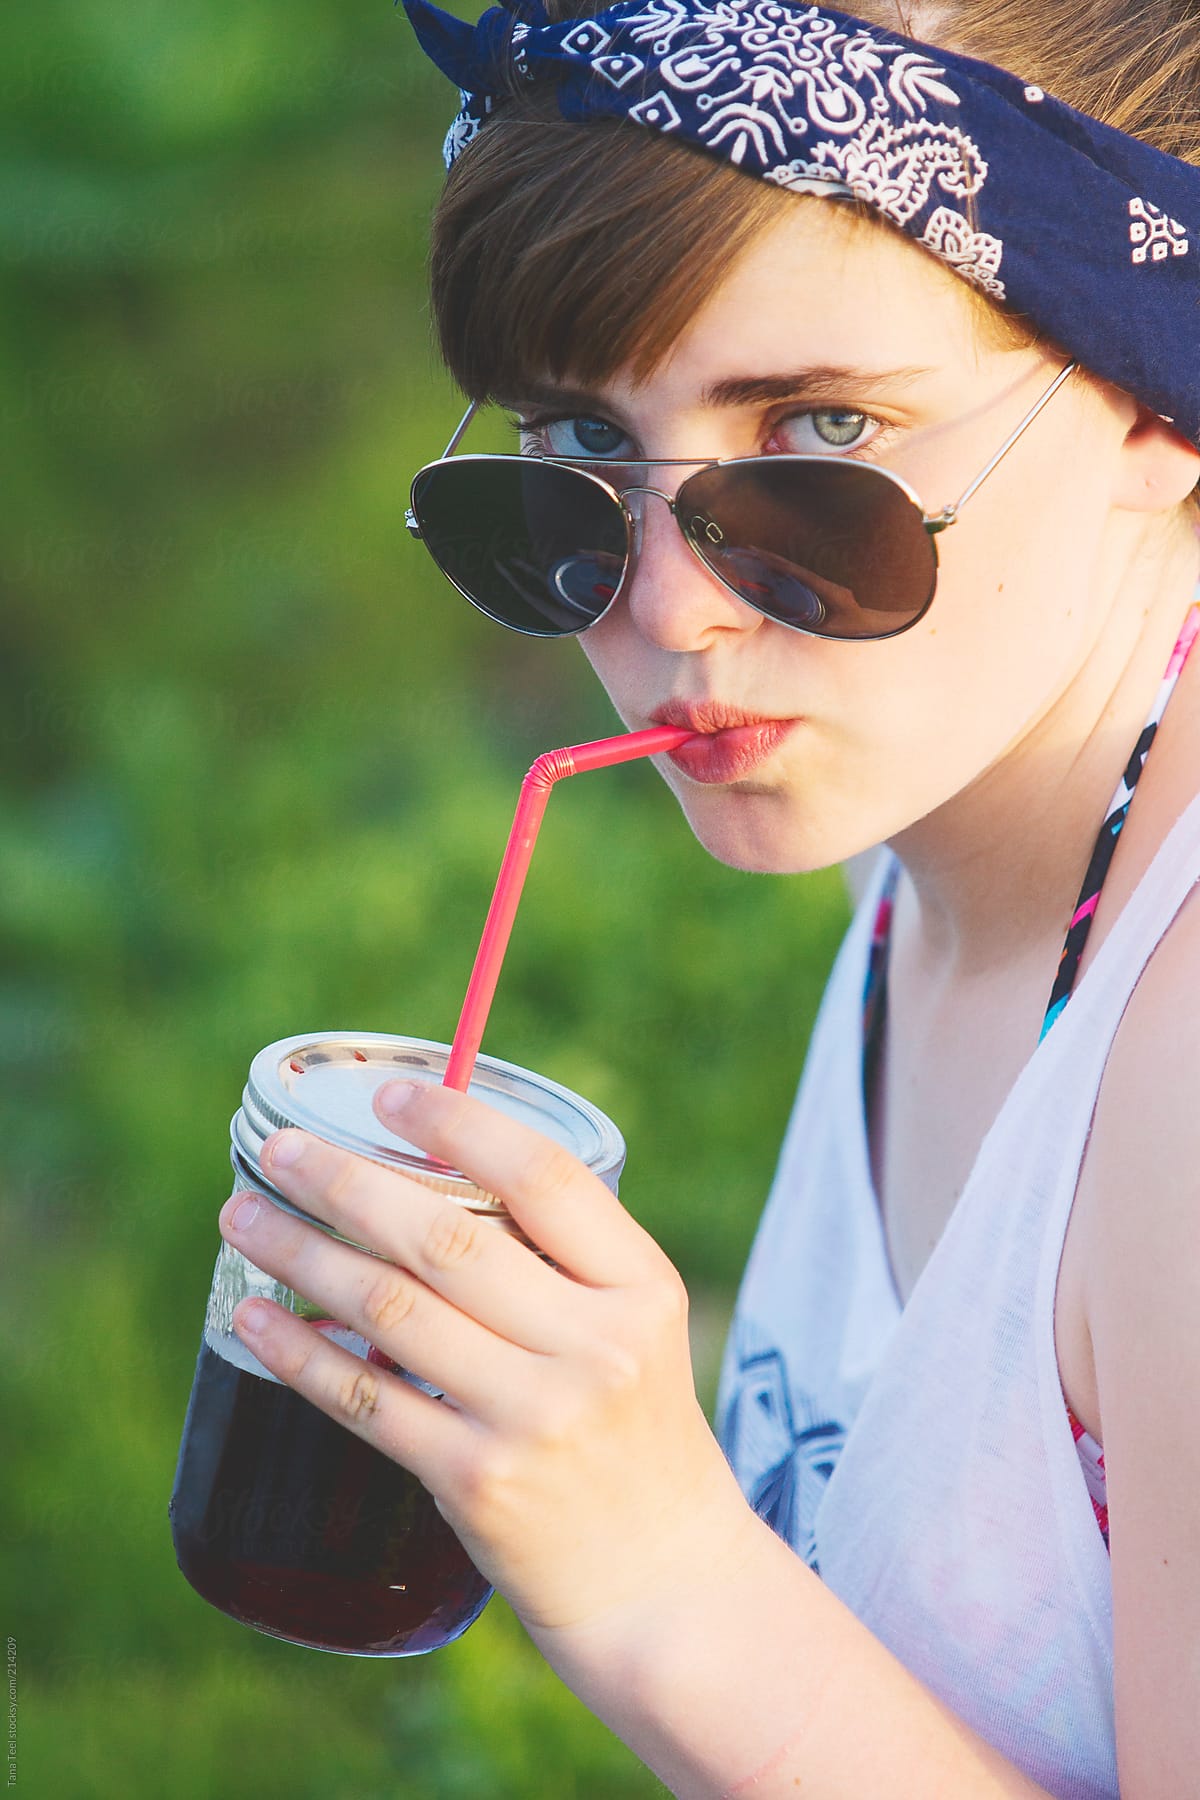 A teen looks over her sunglasses while sipping from a straw